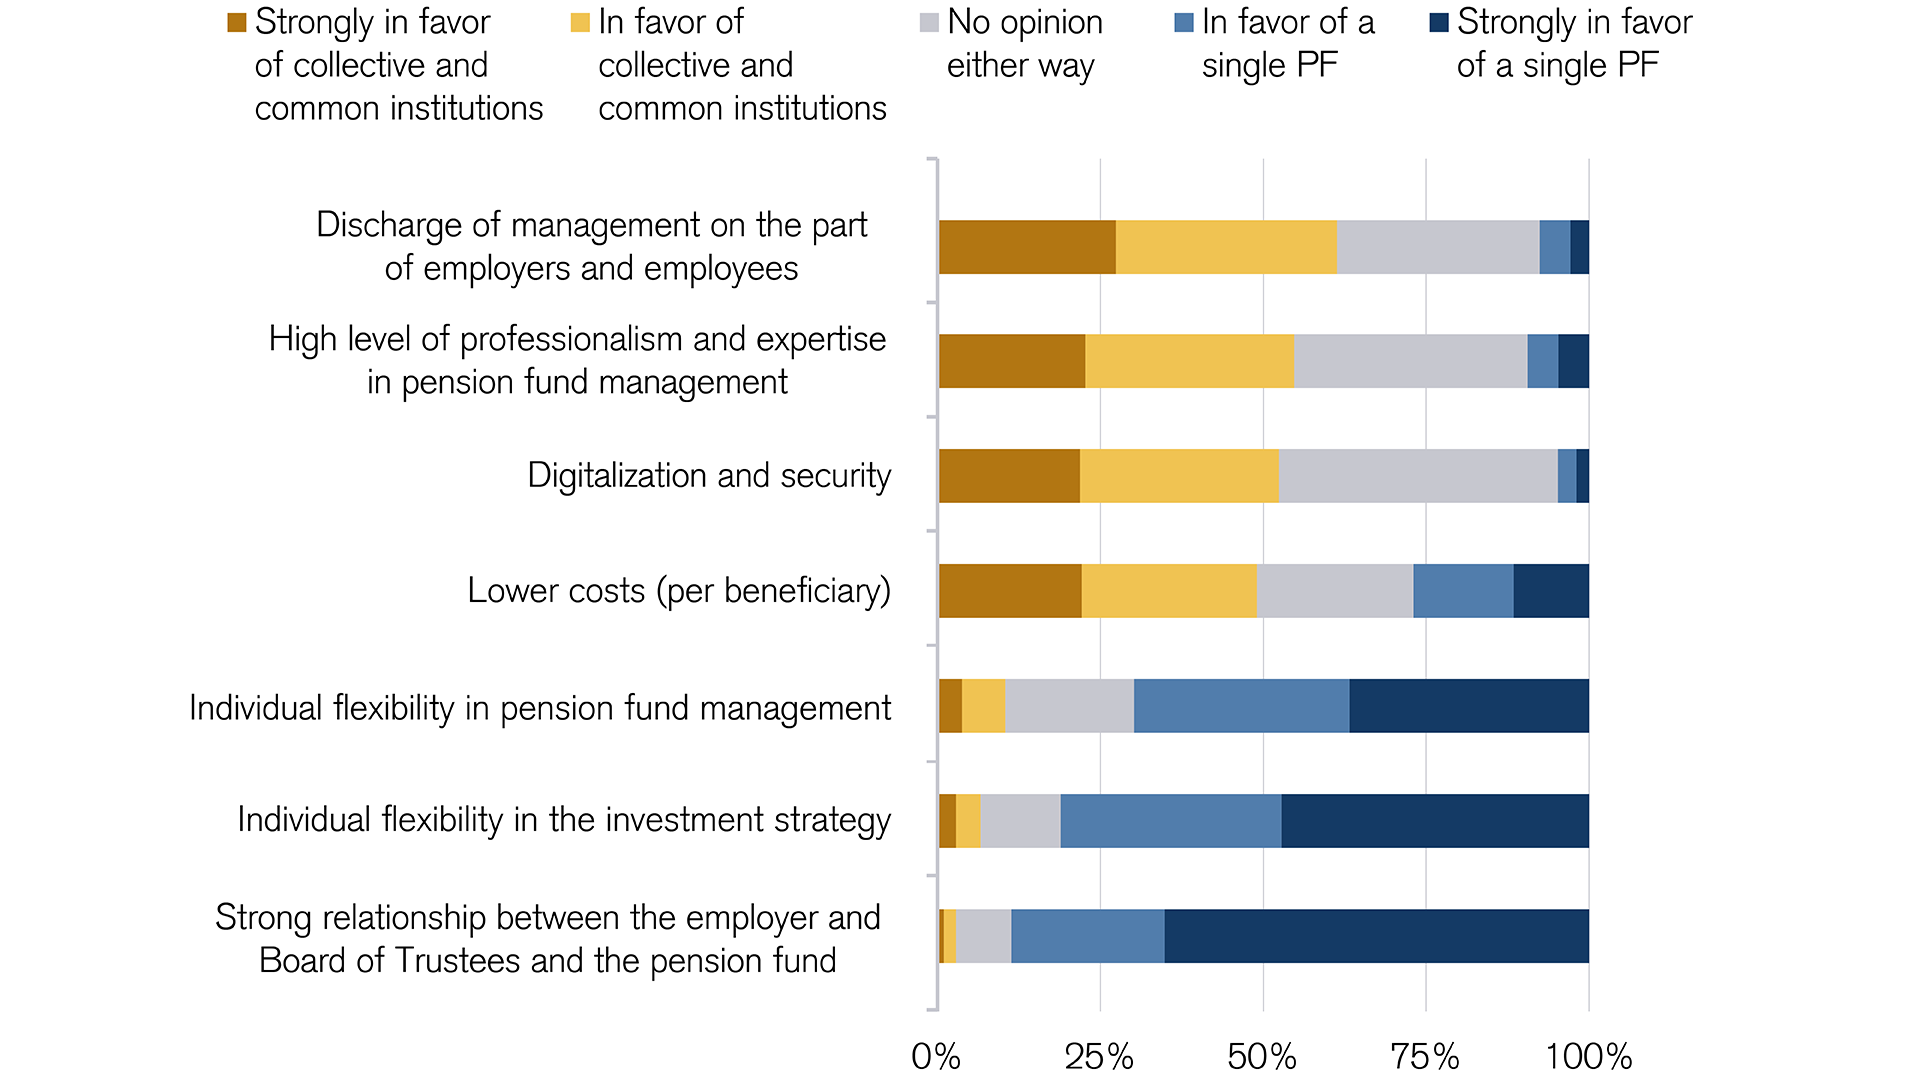 Collective and common institution survey results compared to individual pension funds